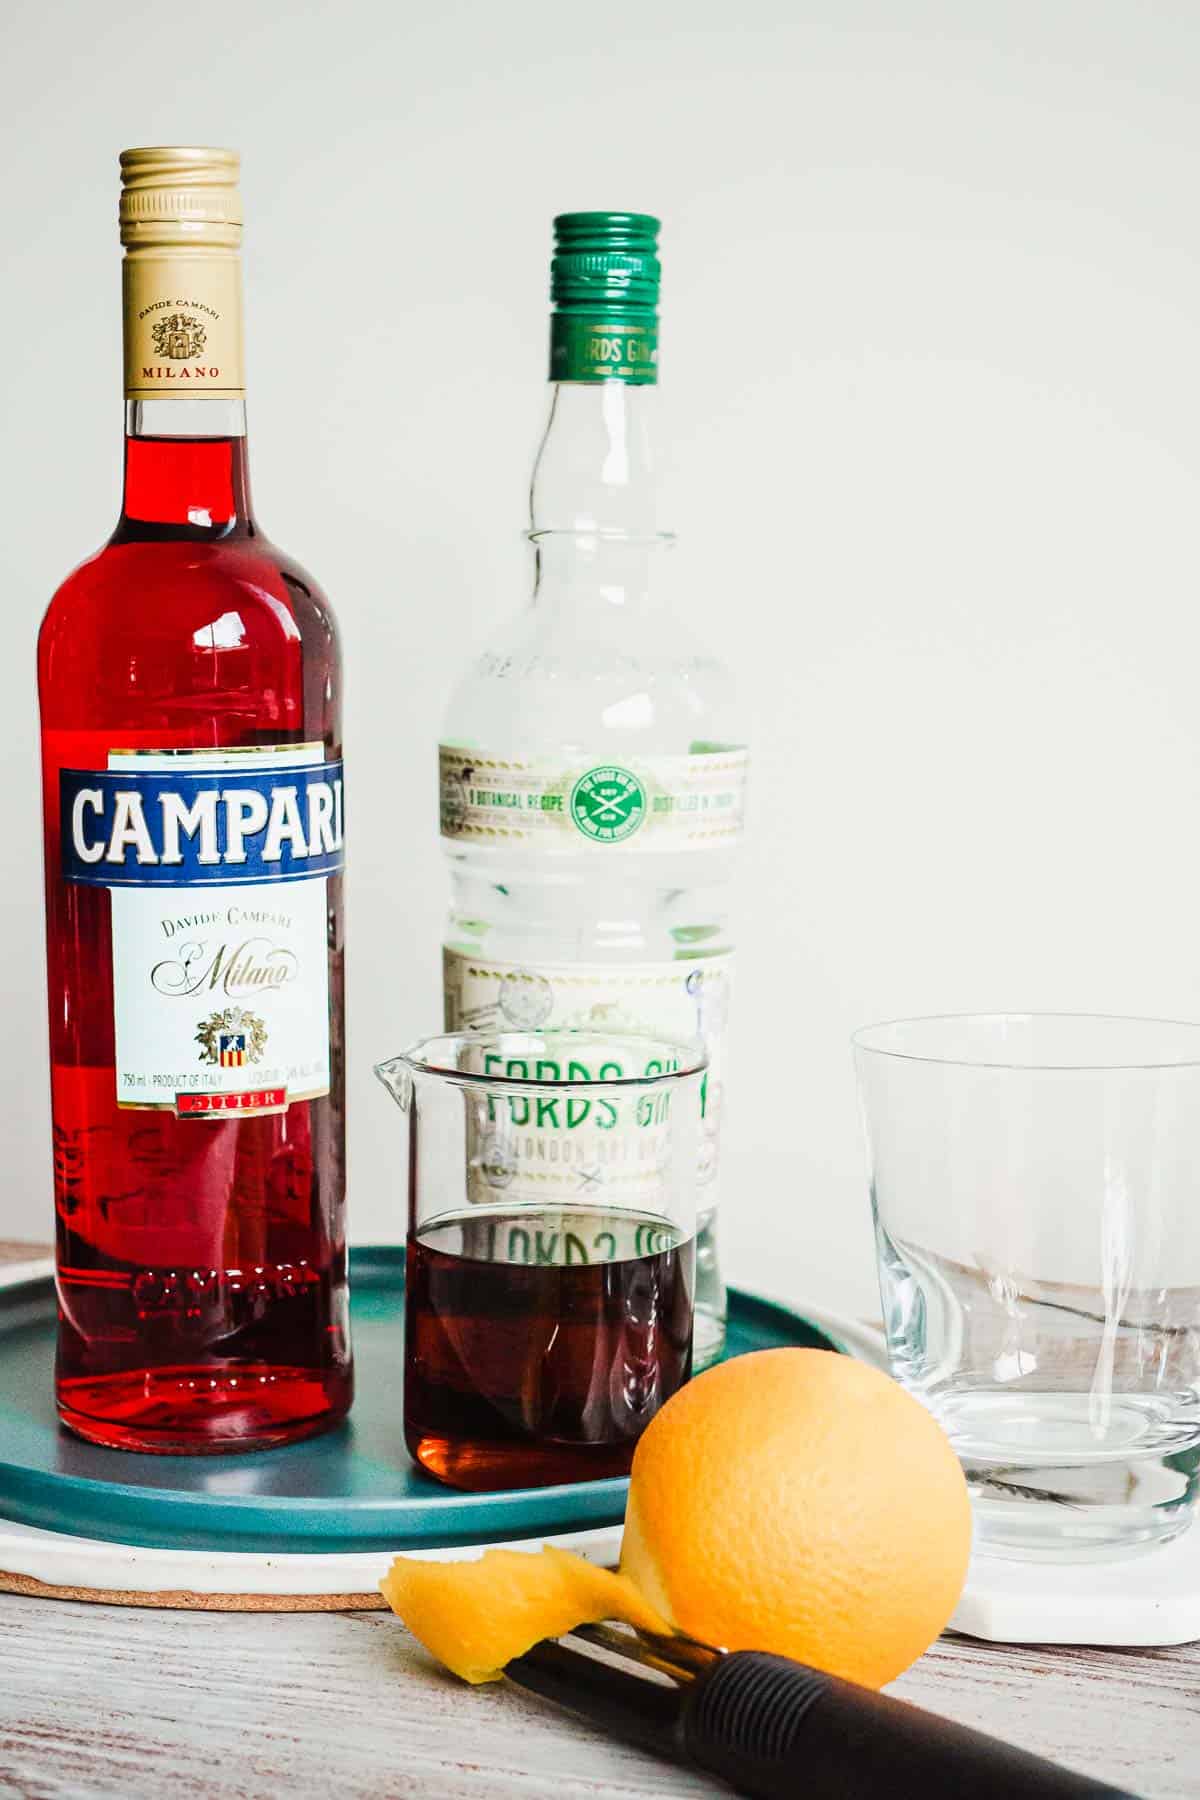 A negroni cocktail in a glass cocktail mixer with no ice and a bottle of campari, gin, and a peeled orange on the side.